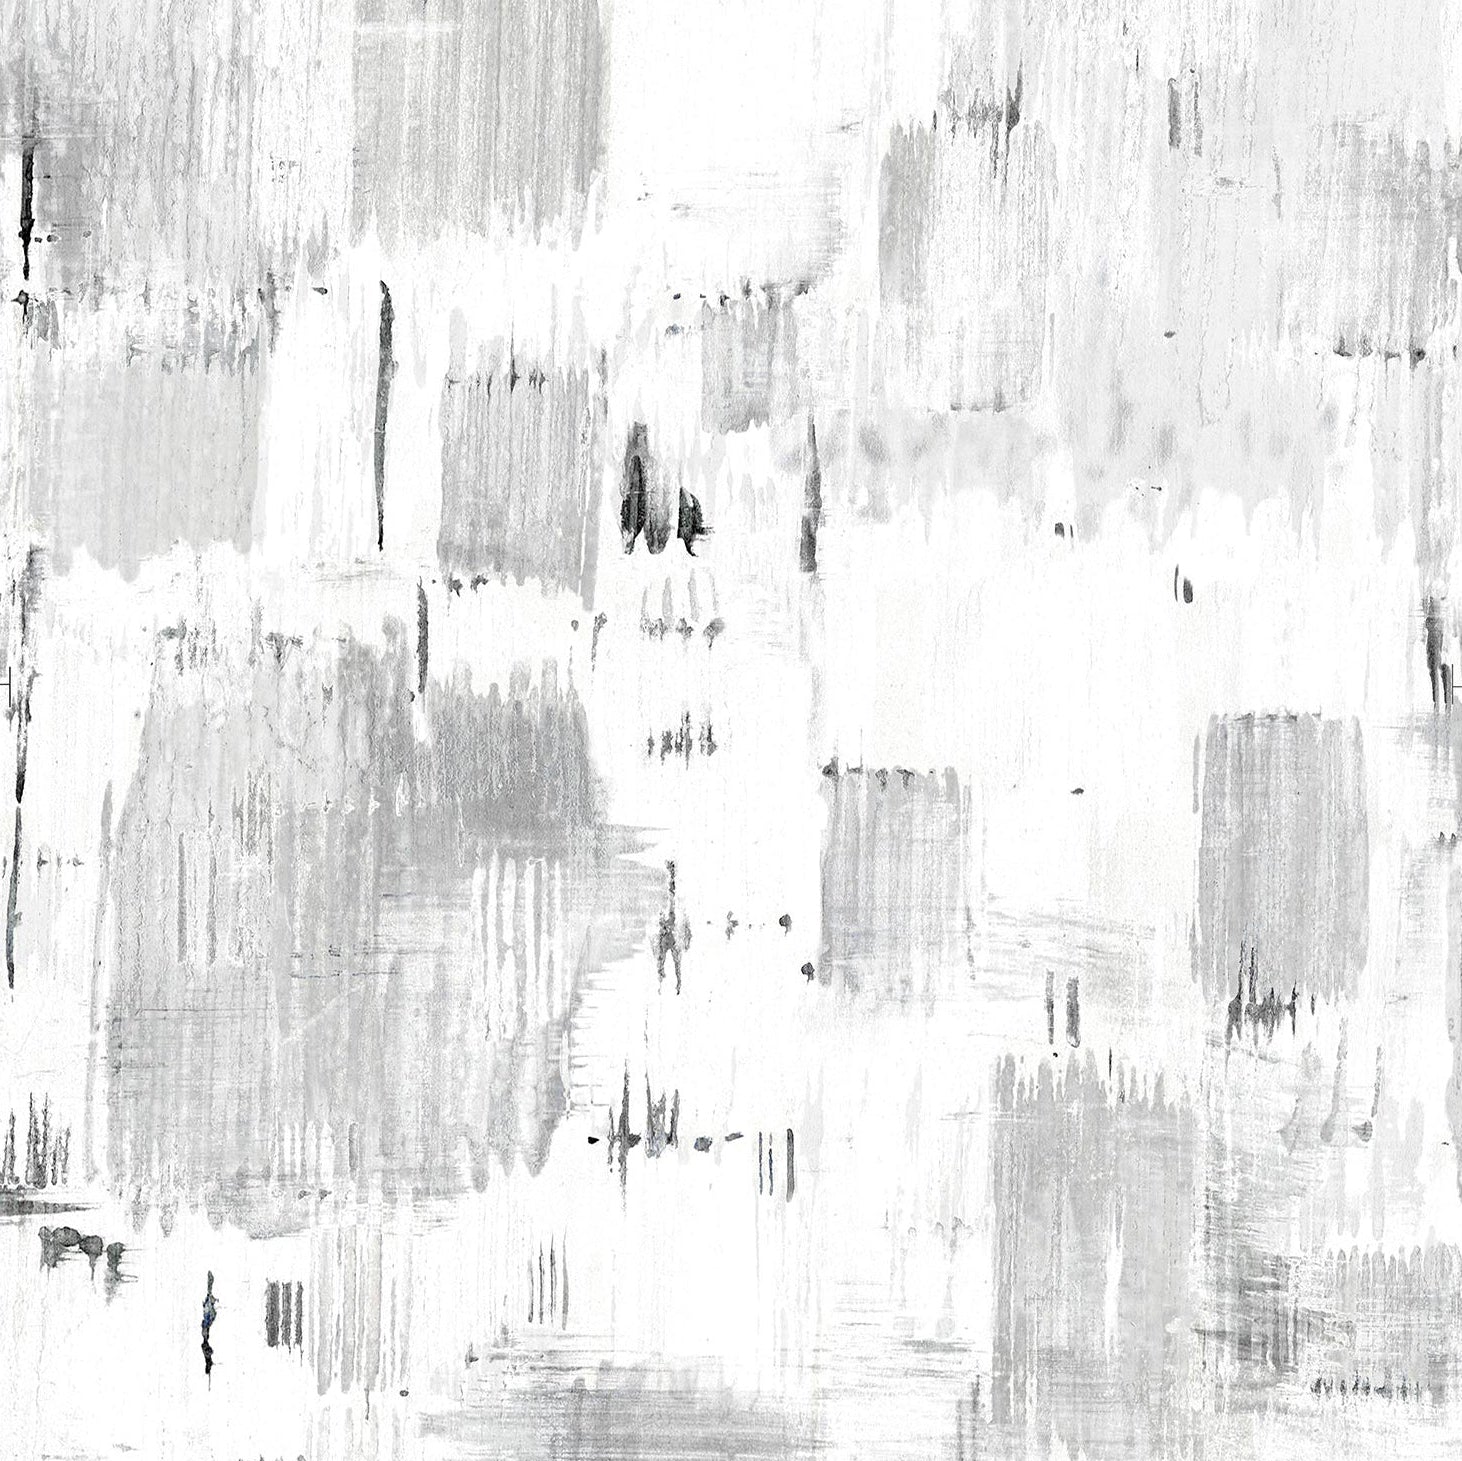 Detail of wallpaper in an abstract textural print in shades of gray on a white field.